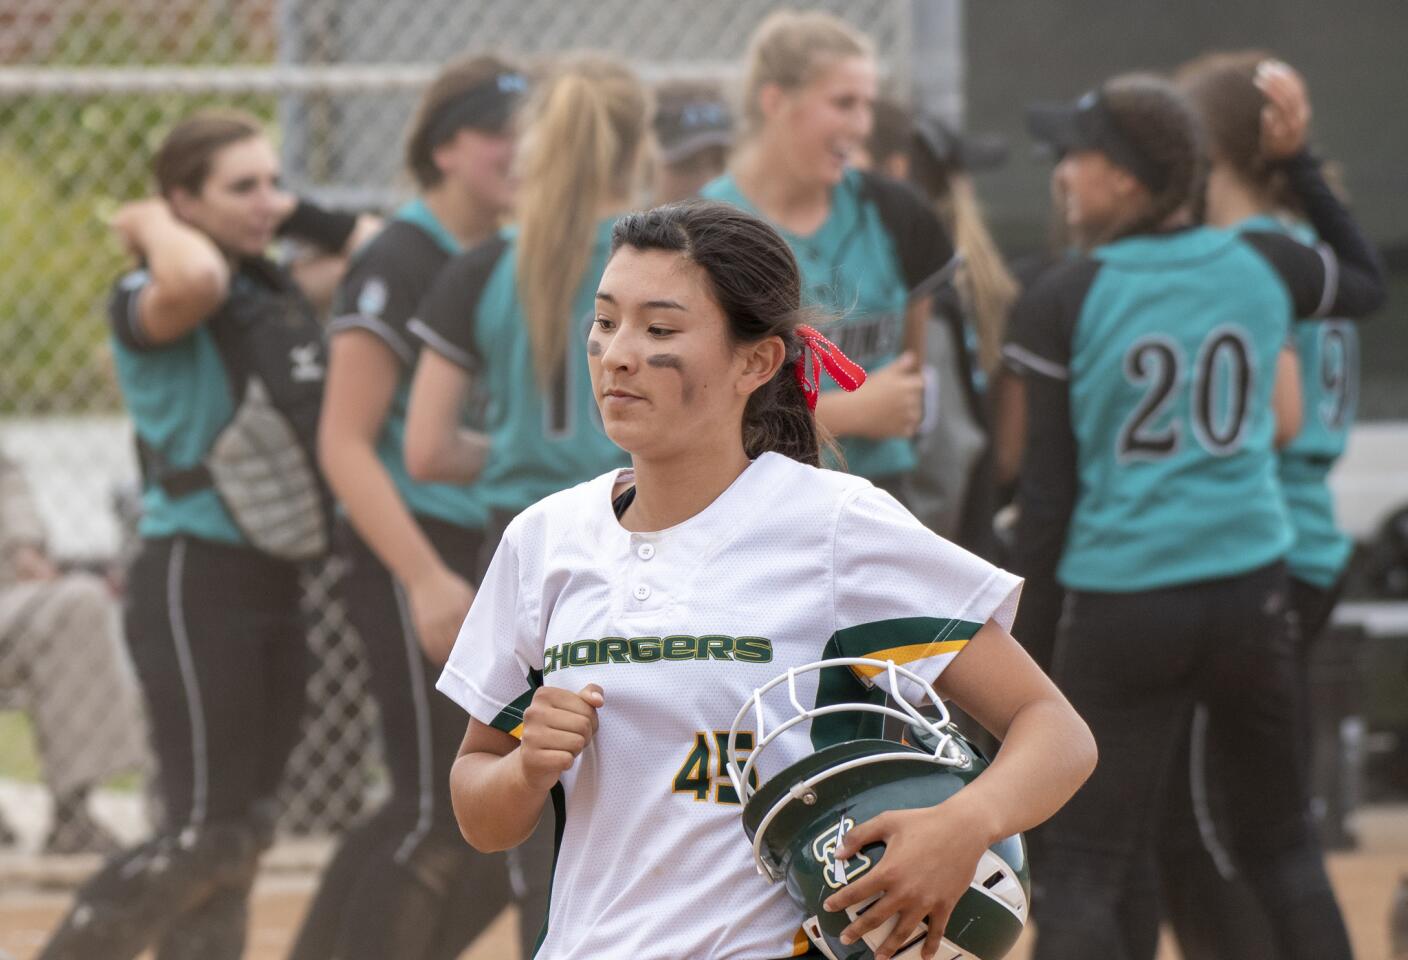 Edison's Serena Starks walks back to dugout following a 1-2 loss to Aliso Niguel in a CIF Southern Section Division 2 playoff game on Tuesday, May 22.